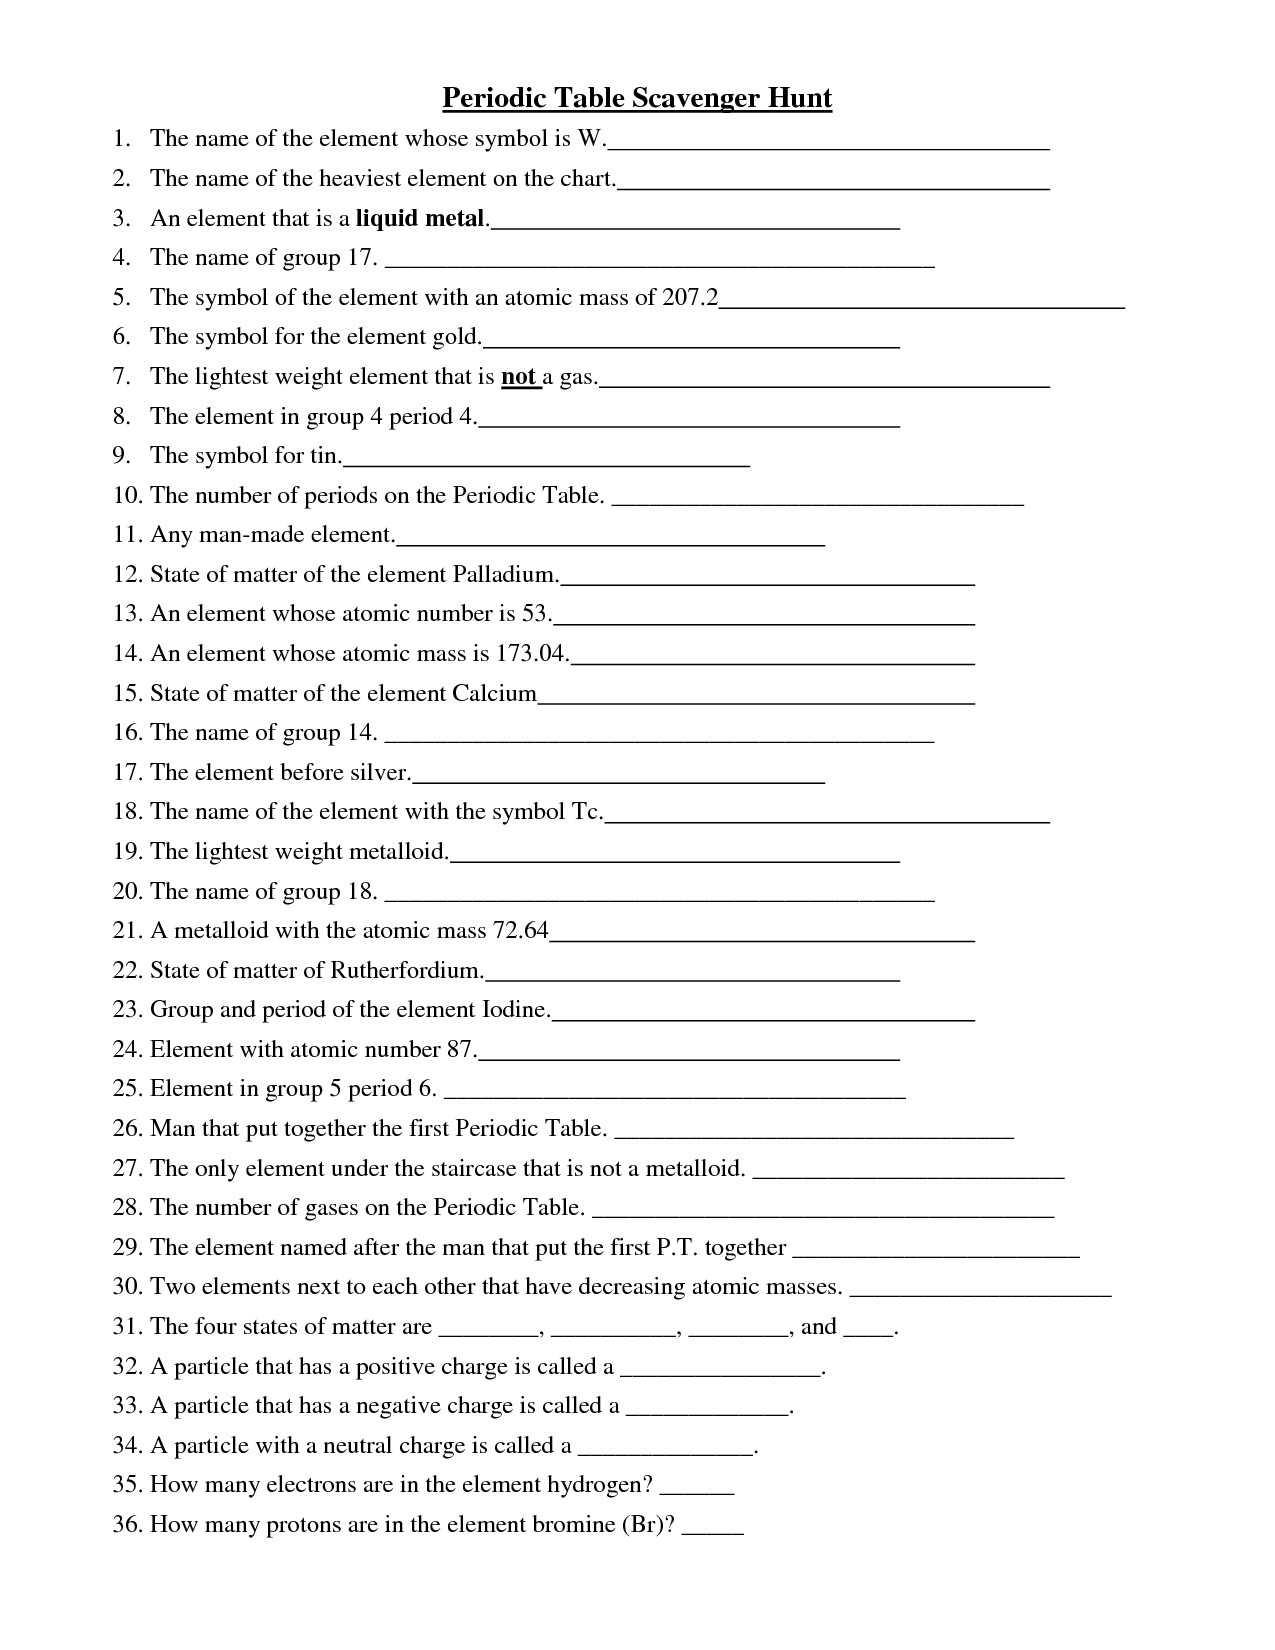 Waves Worksheet Answer Key Physics Also Wave Review ...